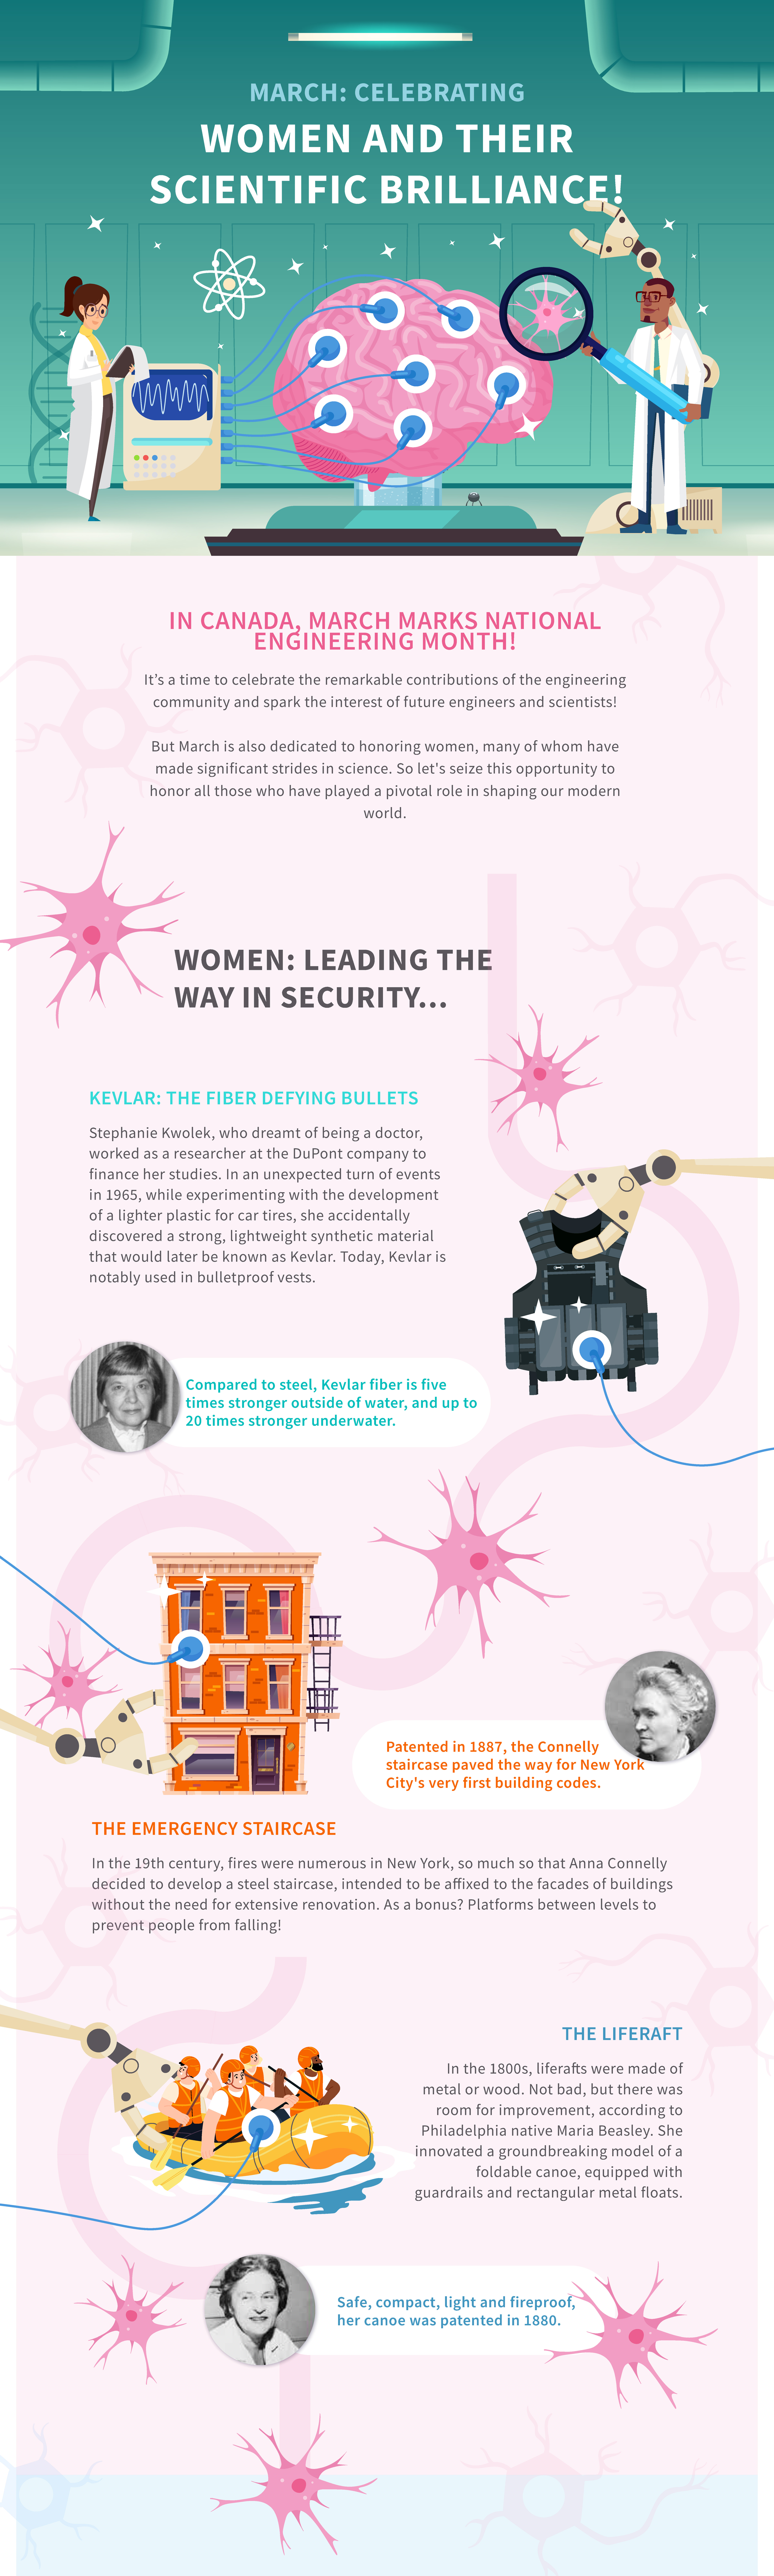 March: Celebrating women and their scientific brilliance!